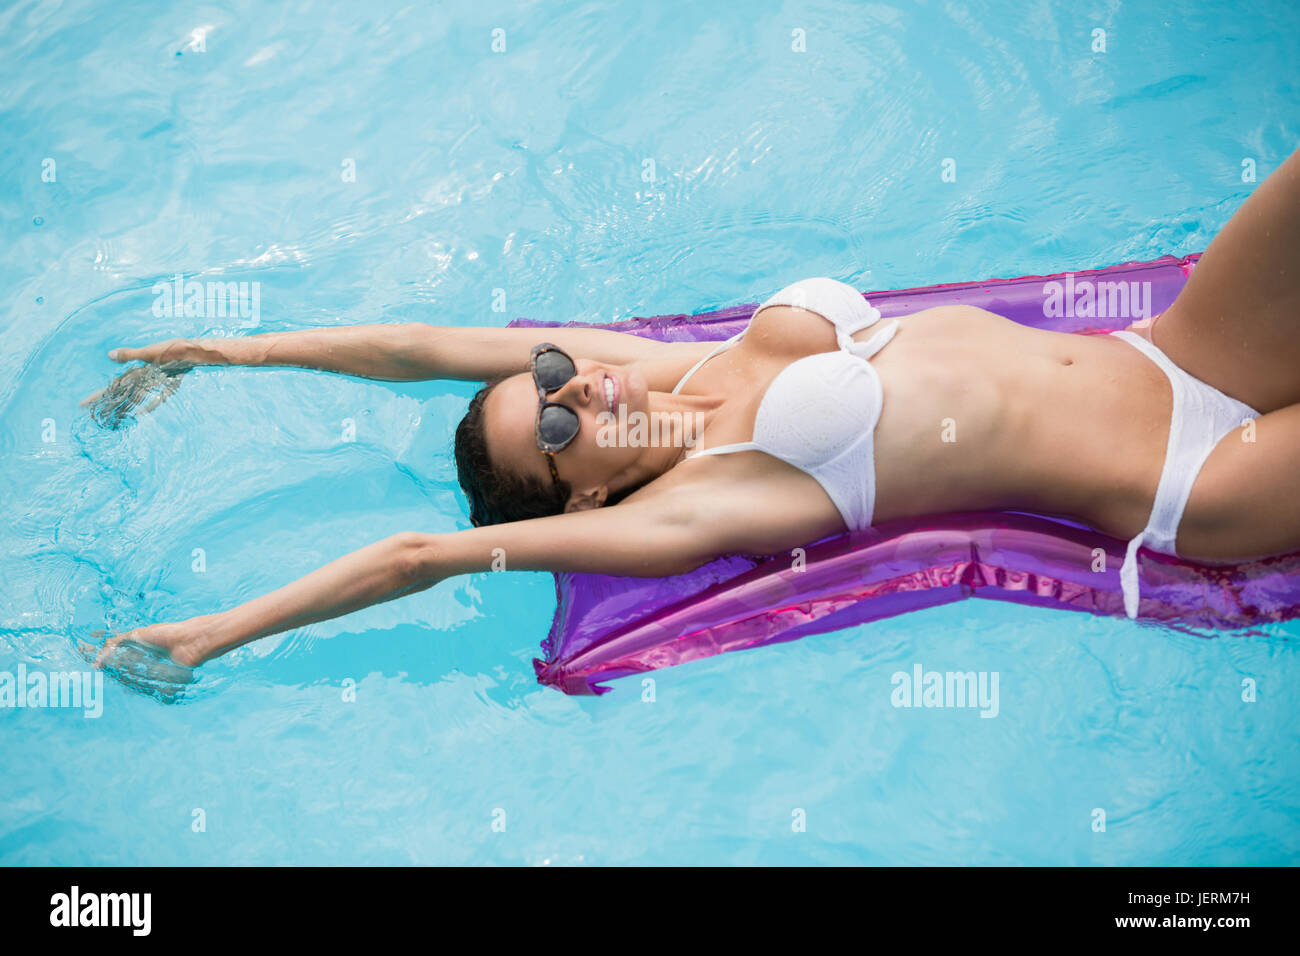 Woman relaxing on inflatable raft Stock Photo